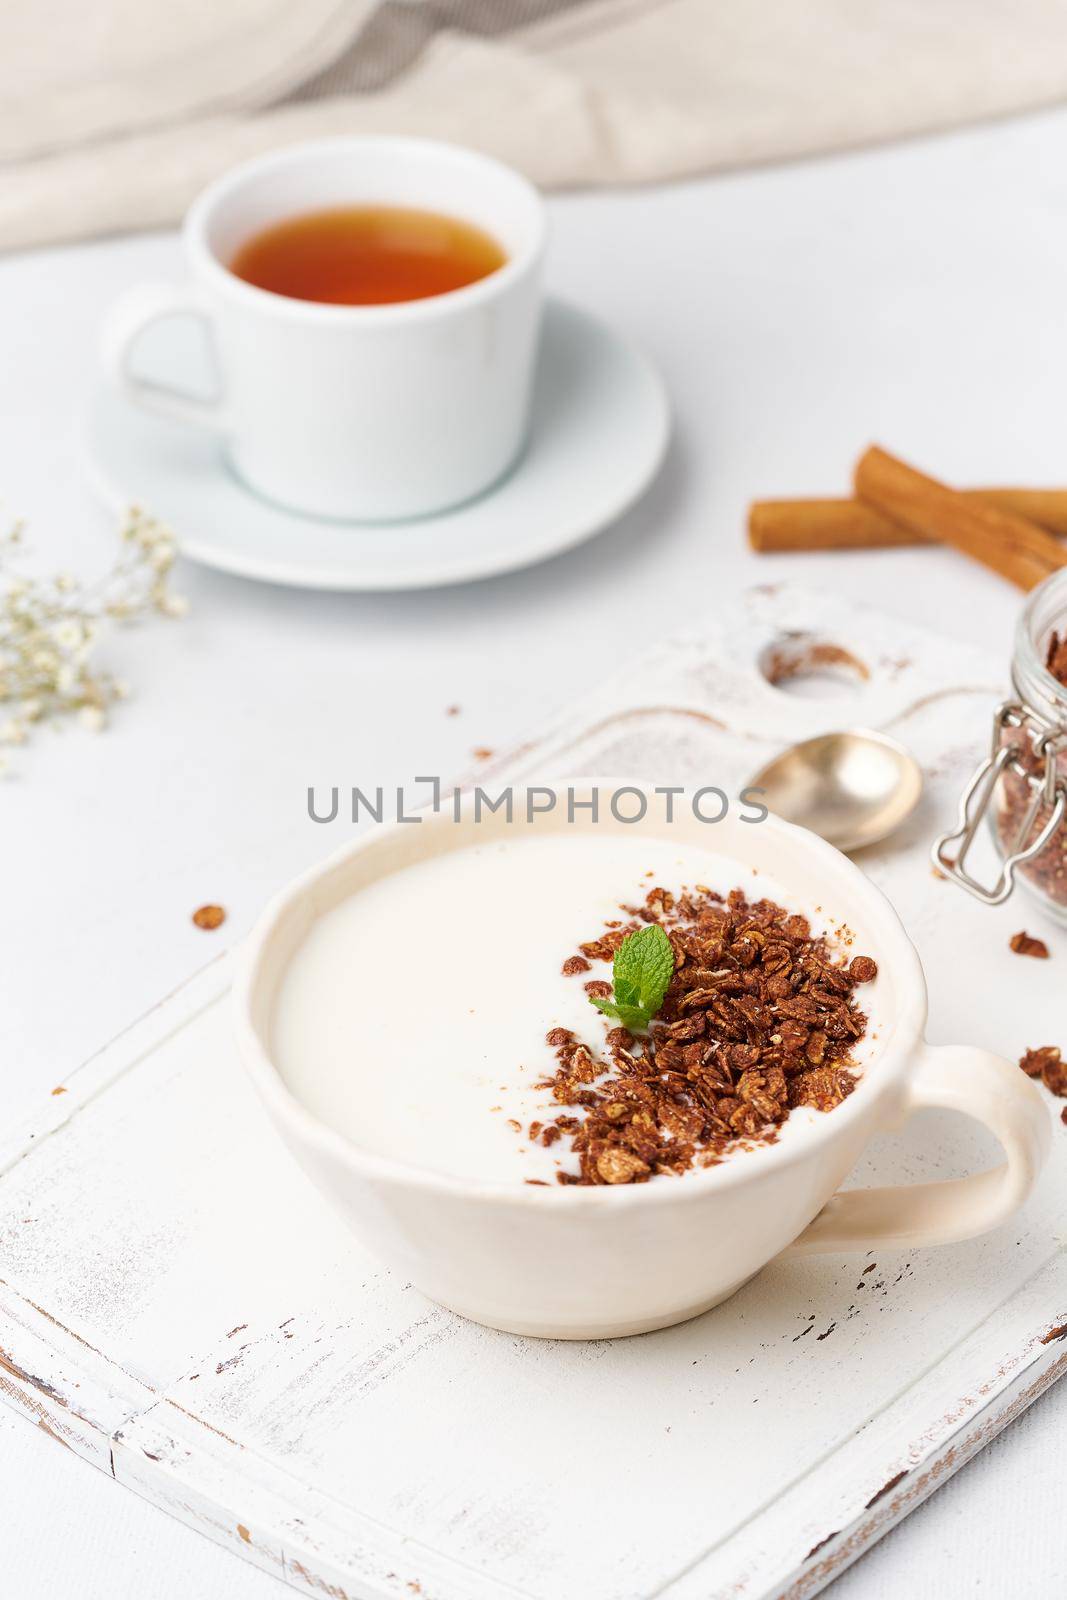 Yogurt with chocolate granola in cup, breakfast with tea on white wooden background, vertical